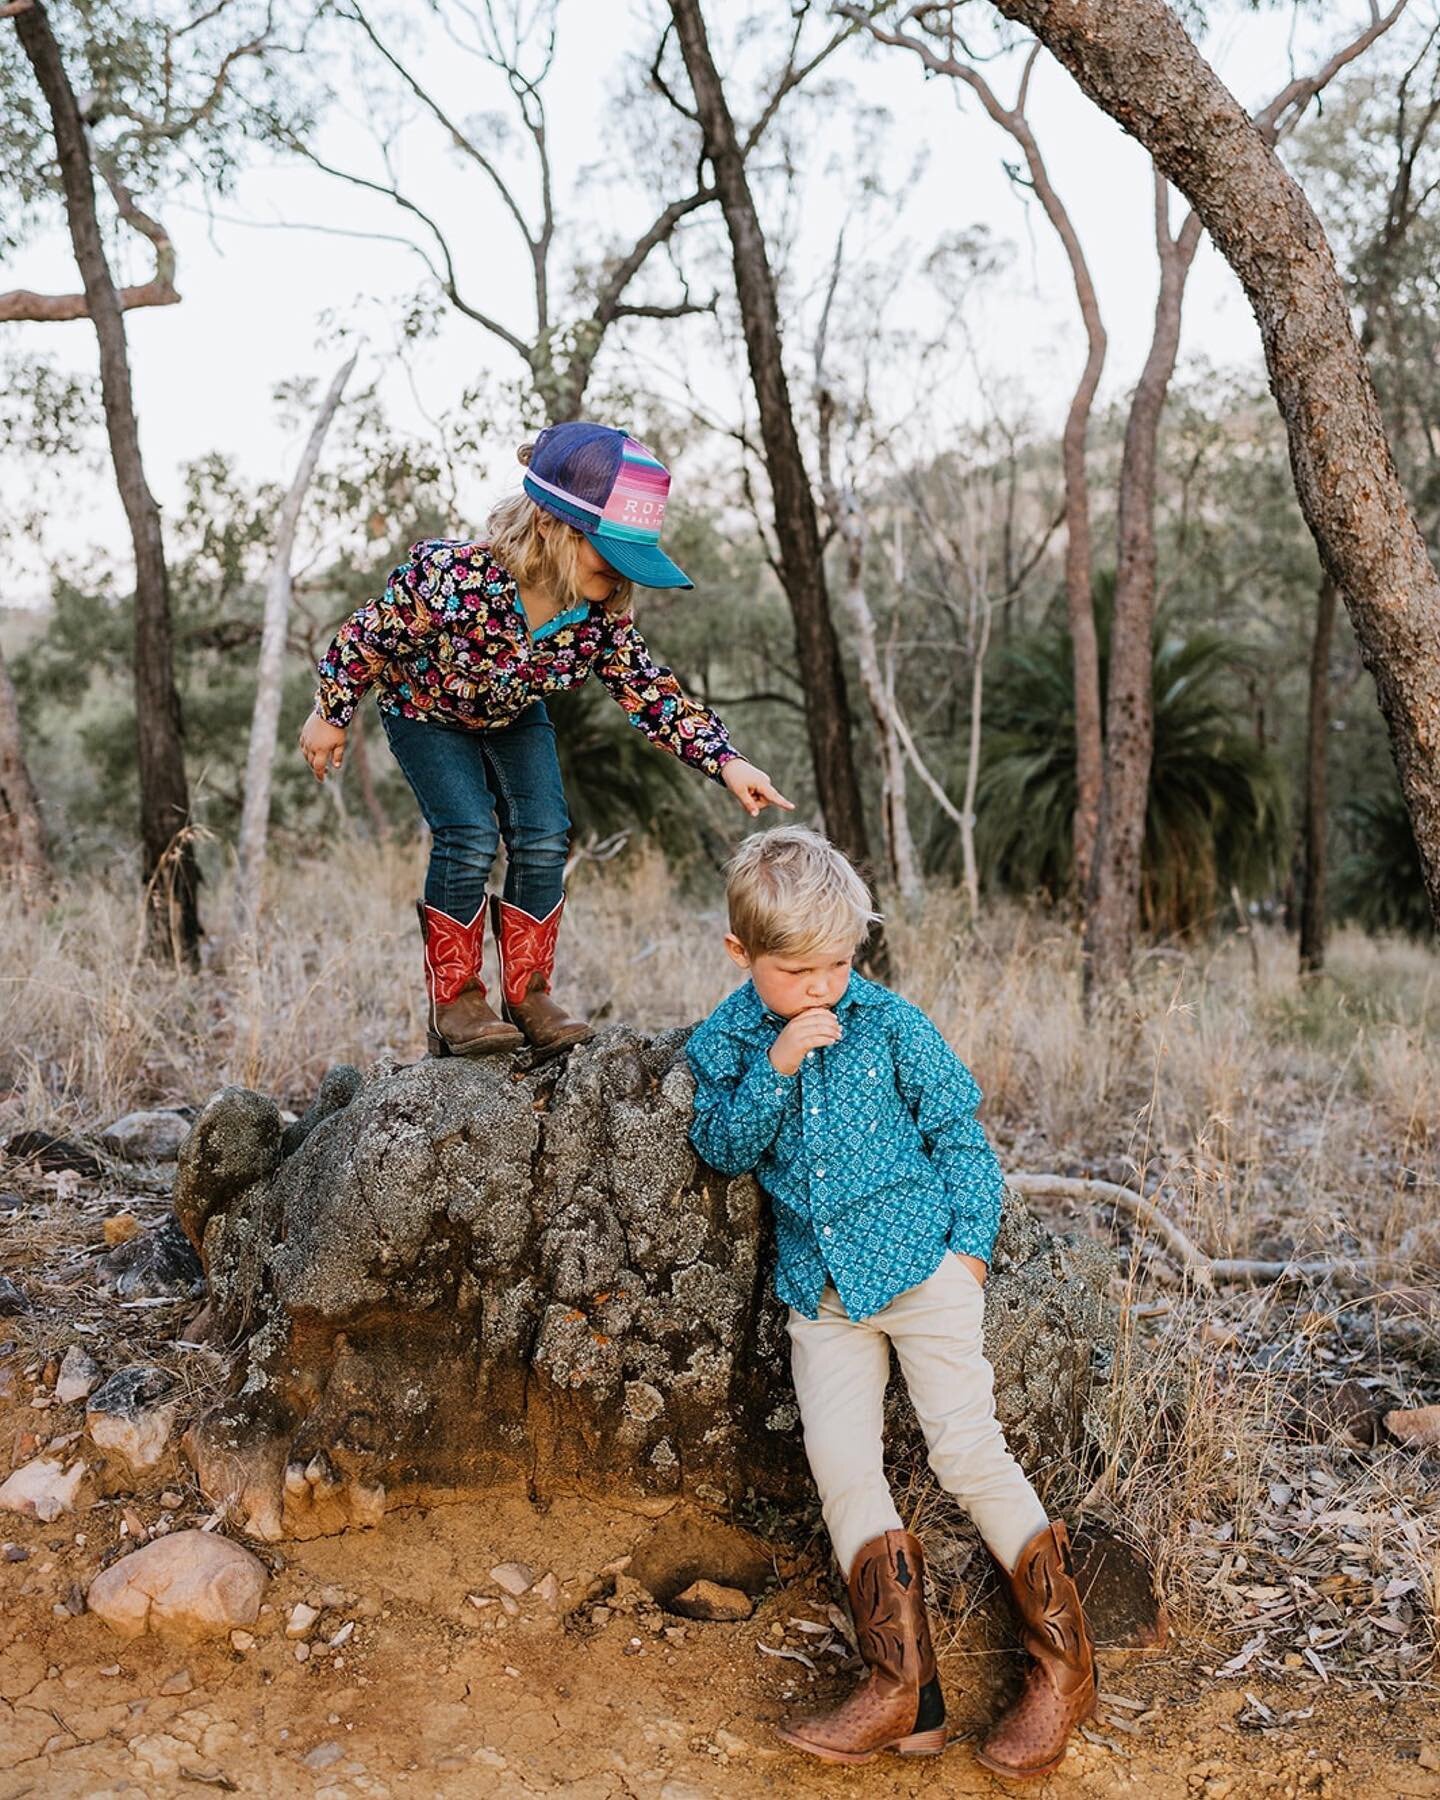 Take me back to #carnarvongorge hanging out, watching sunsets 🌅 and taking pics in our @justcountryaustralia gear!!

@roperworld 

#brisbanefamilyphotographer #queenslandfamilyphotographer #outbackqueensland